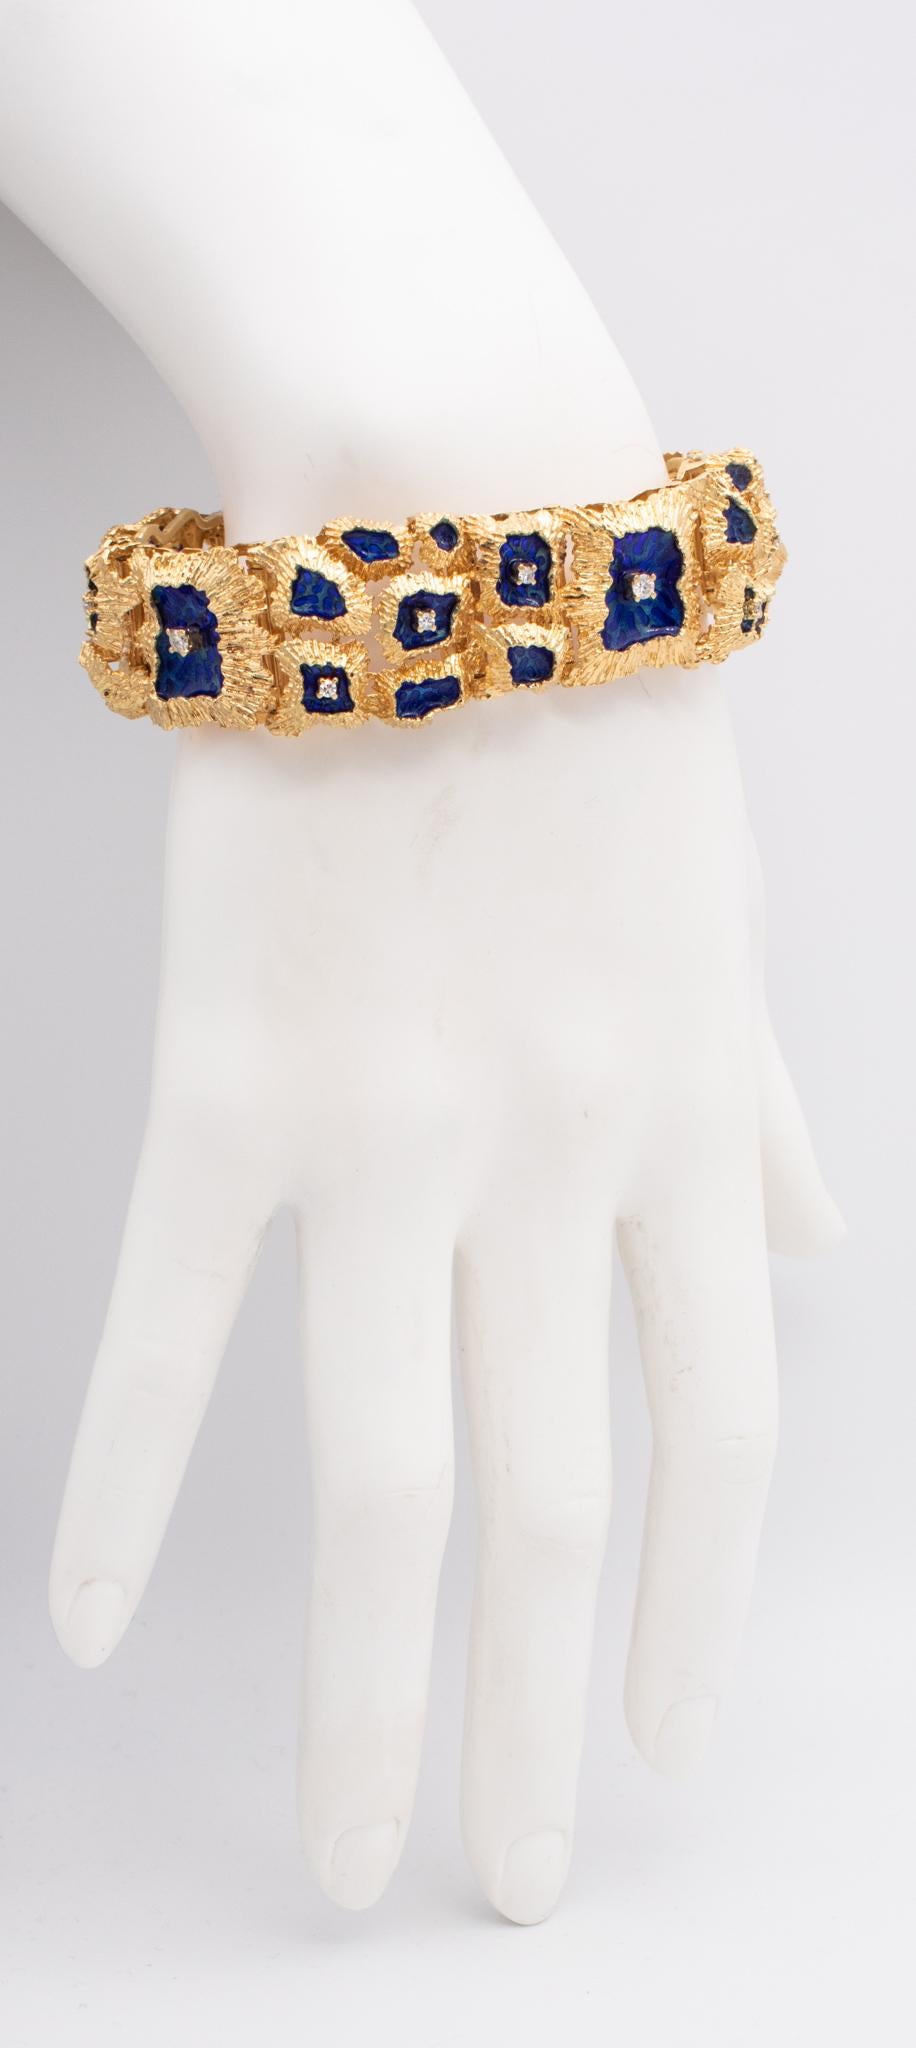 Fantastic brutalist plique a jour Italian bracelet.

A great Italian artistic piece, made at the beginning of the the 1970's and designed with brutalist patterns. It was crafted in solid yellow gold of 18 carats with textures and embellished, with